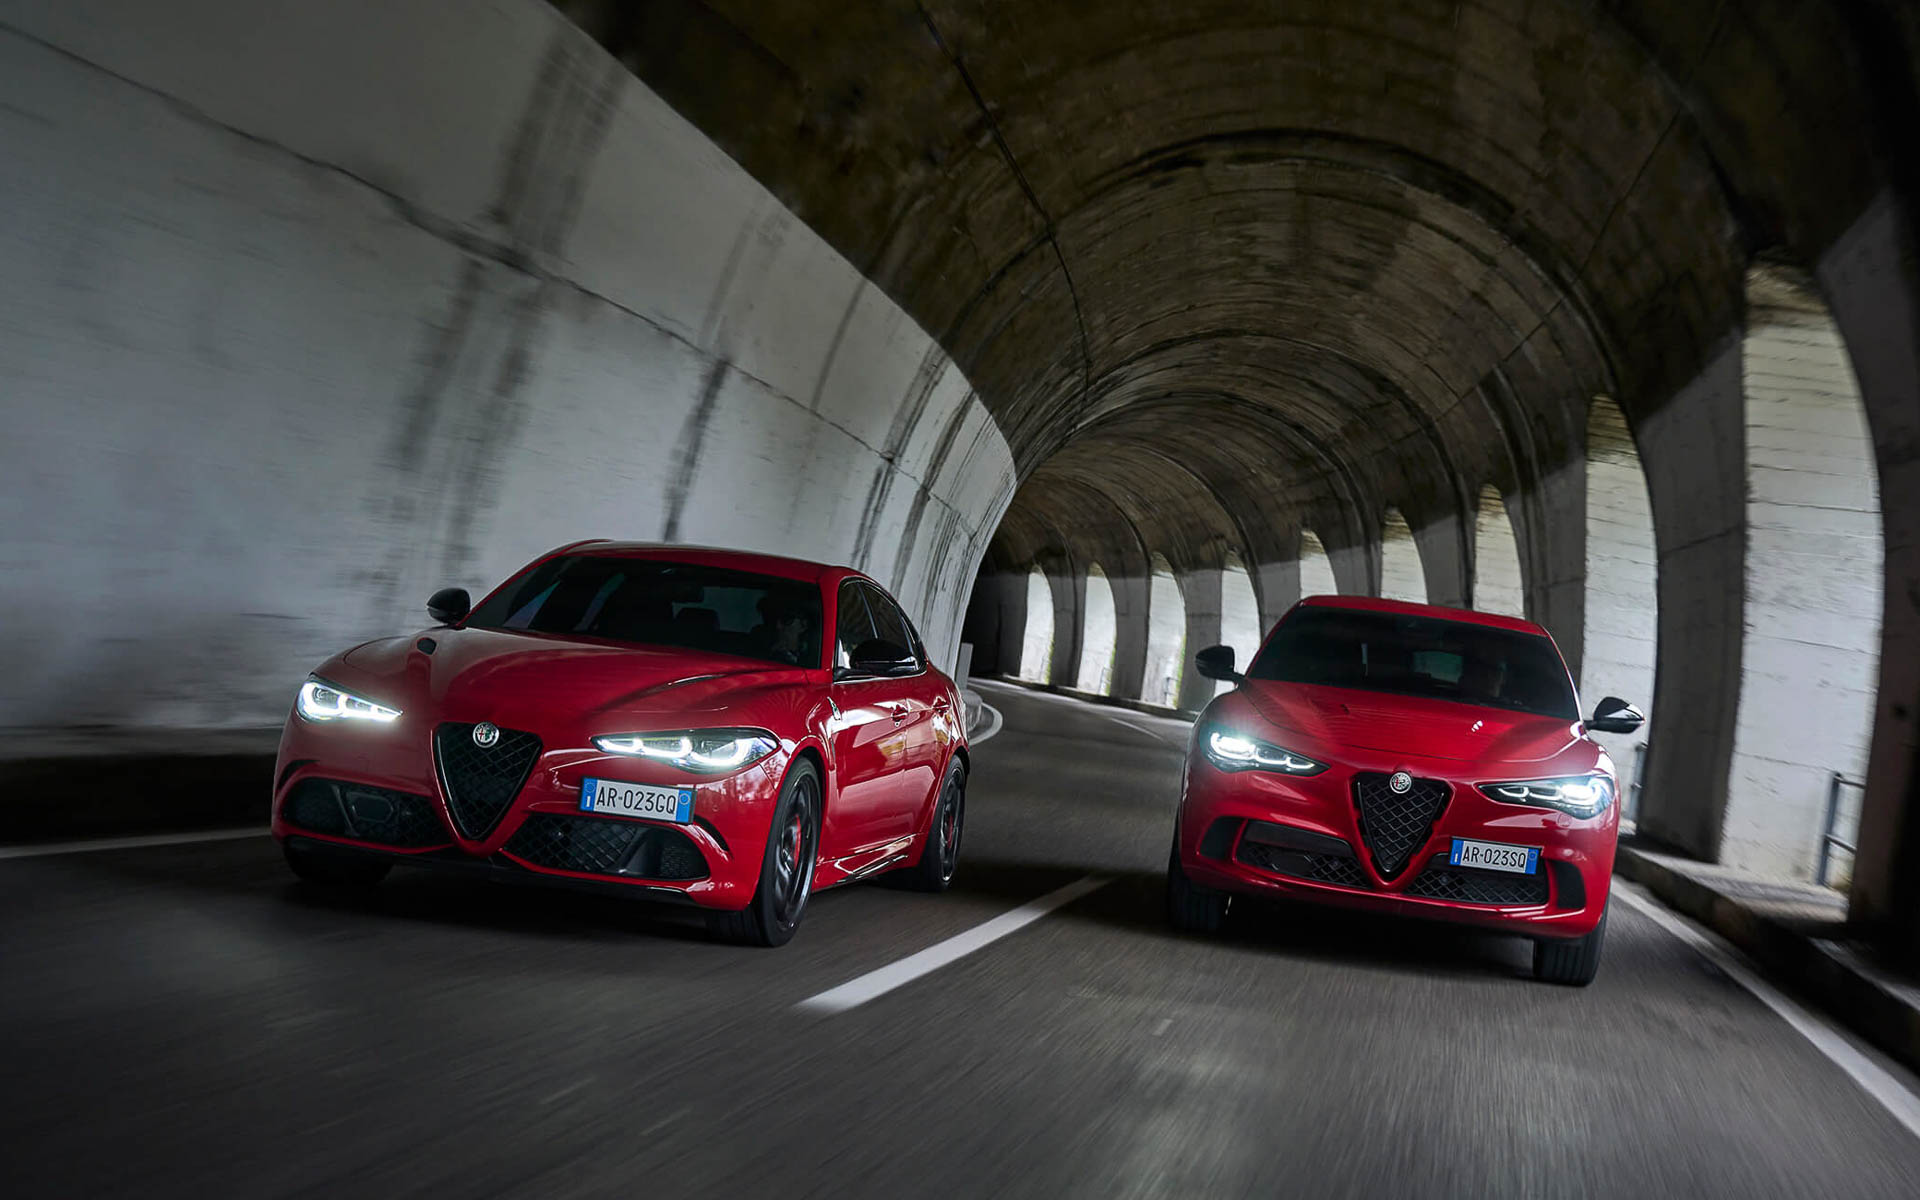 Alfa Romeo changes specifications to improve driving performance of the high-performance model “Quadrifoglio” of “Giulia” and “Stelvio”